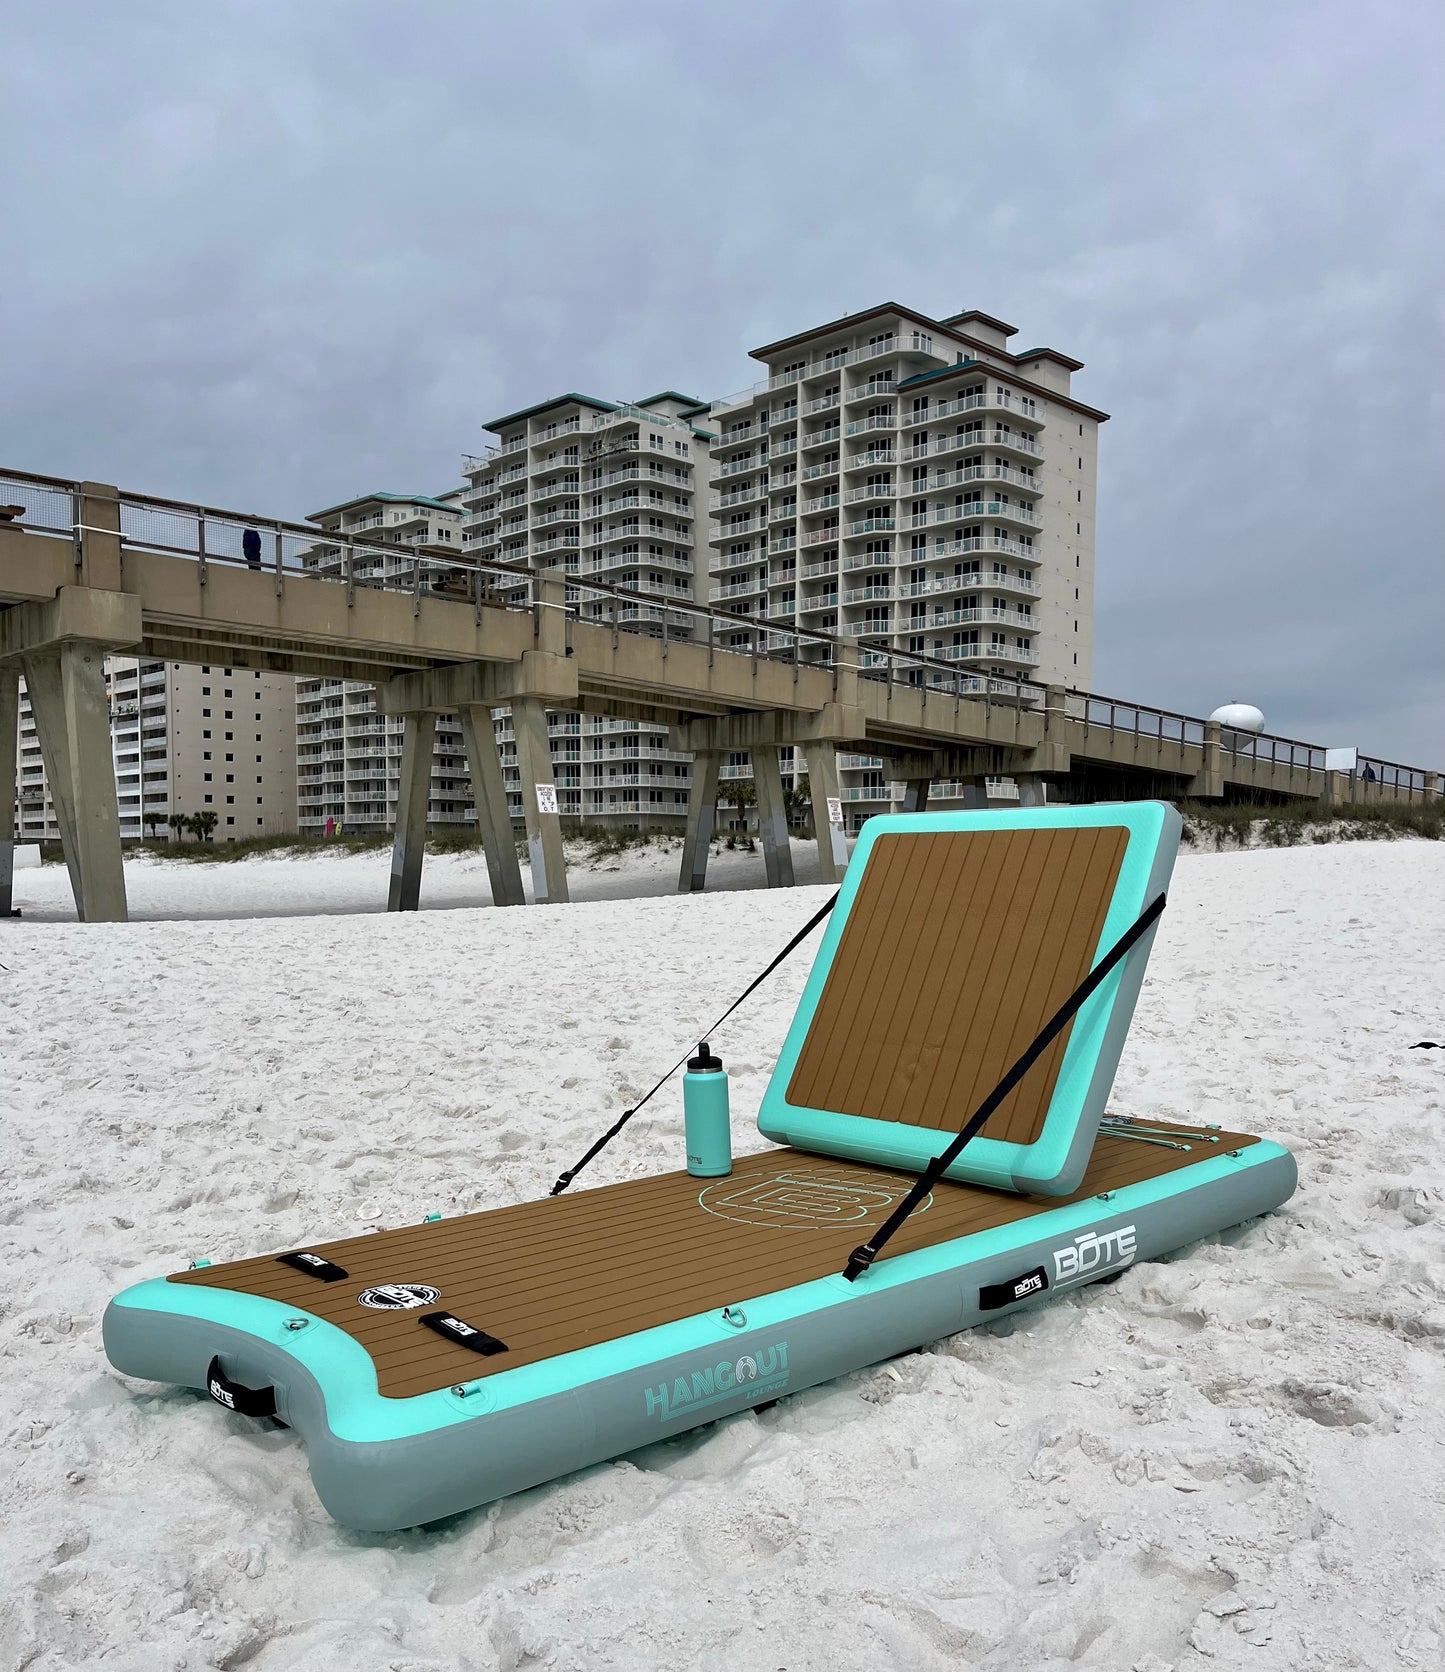 "Beach Buddy" Inflatable Bote Floating Lounge